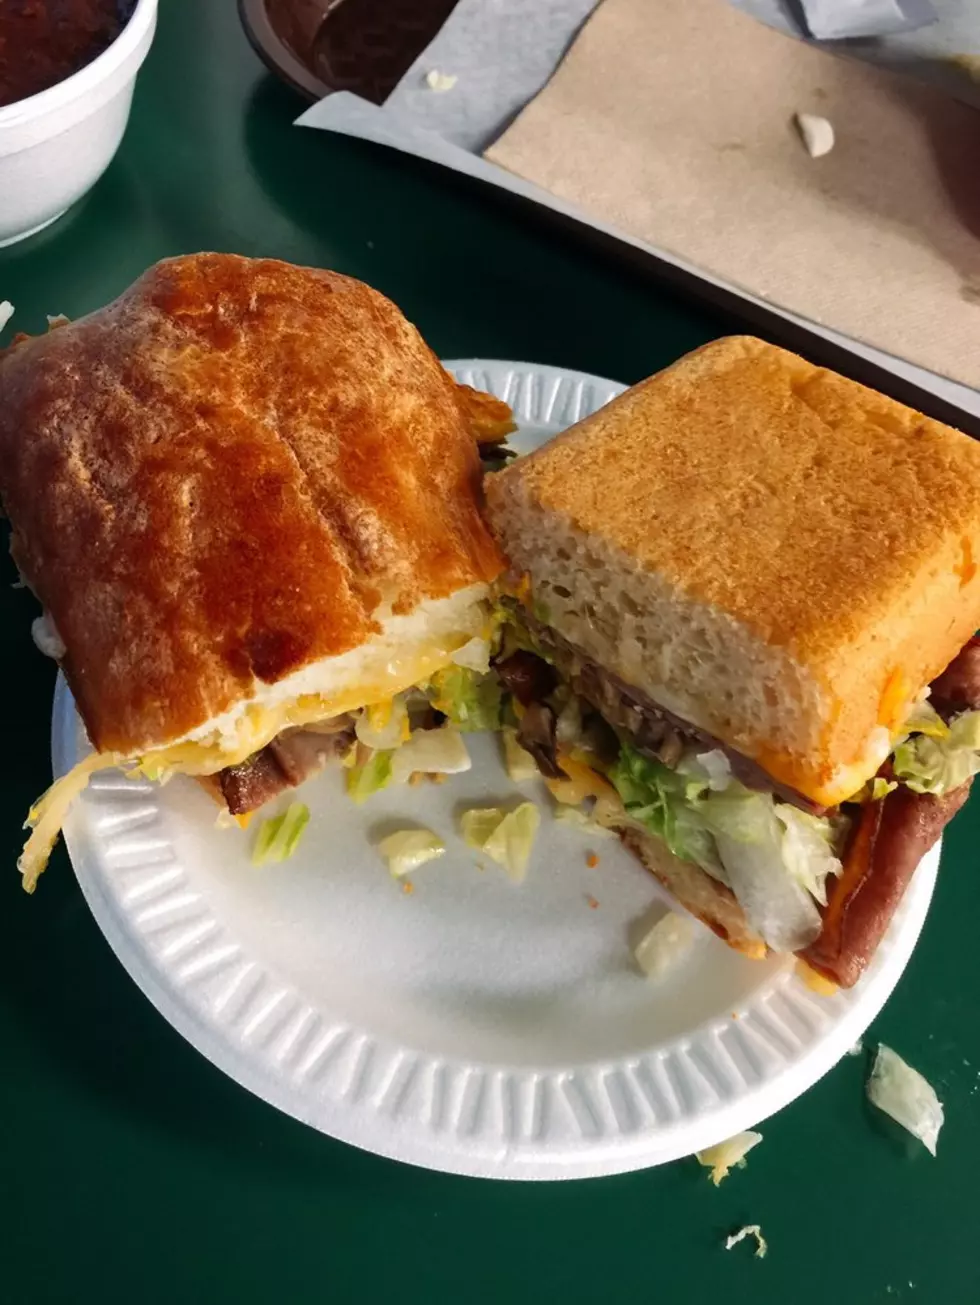 The Best Sandwiches In Sedalia (As Rated By Yelp)